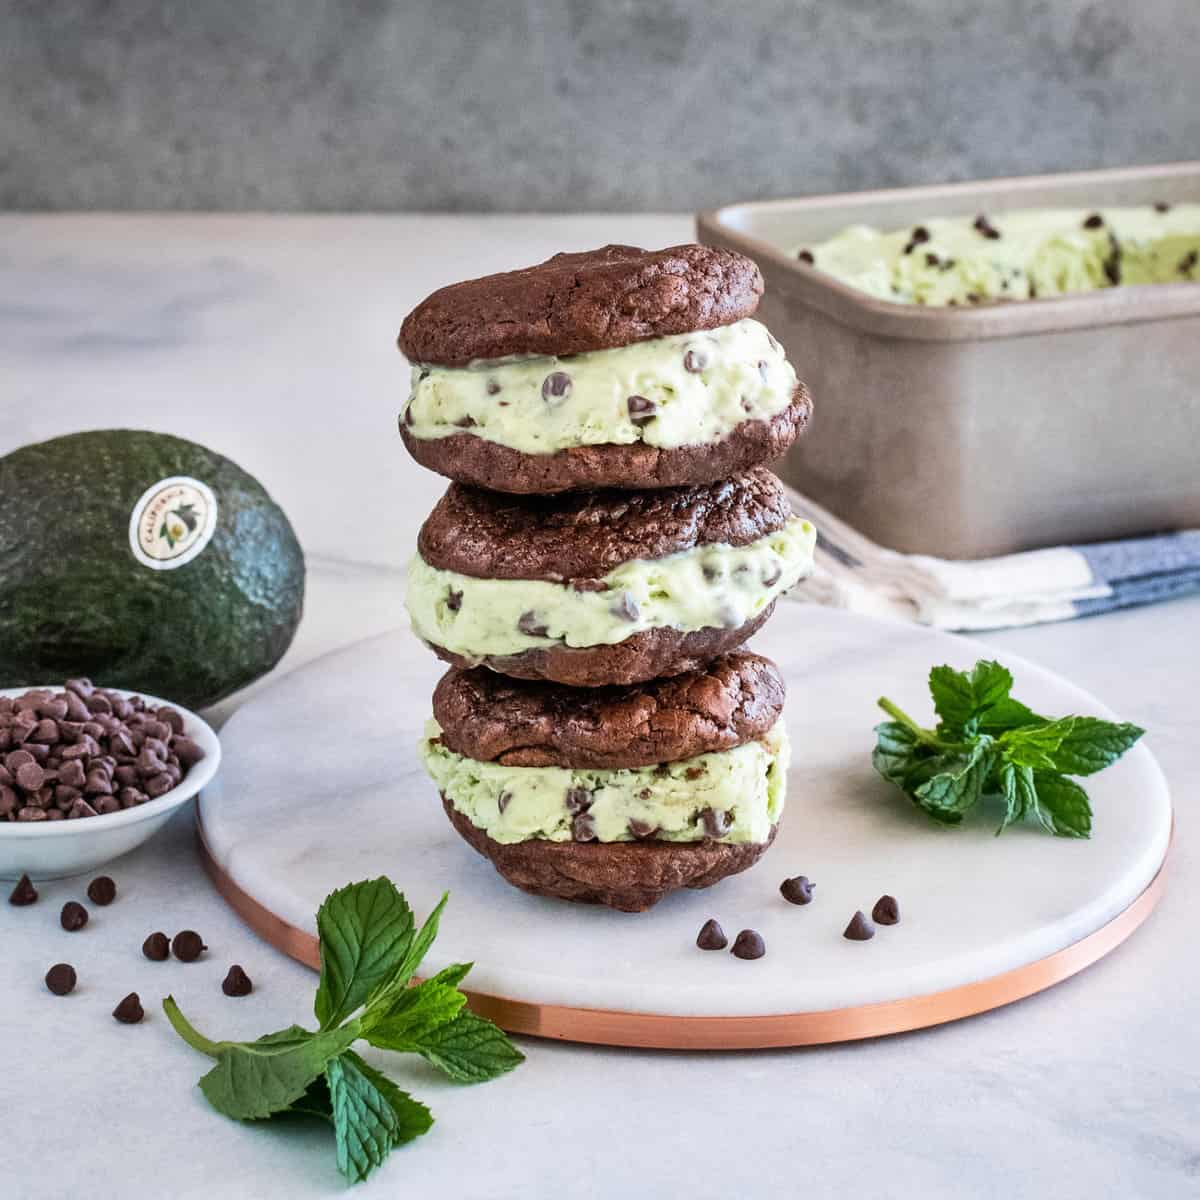 Mint Chocolate Ice Cream Sandwiches with California Avocados from Husbands that Cook